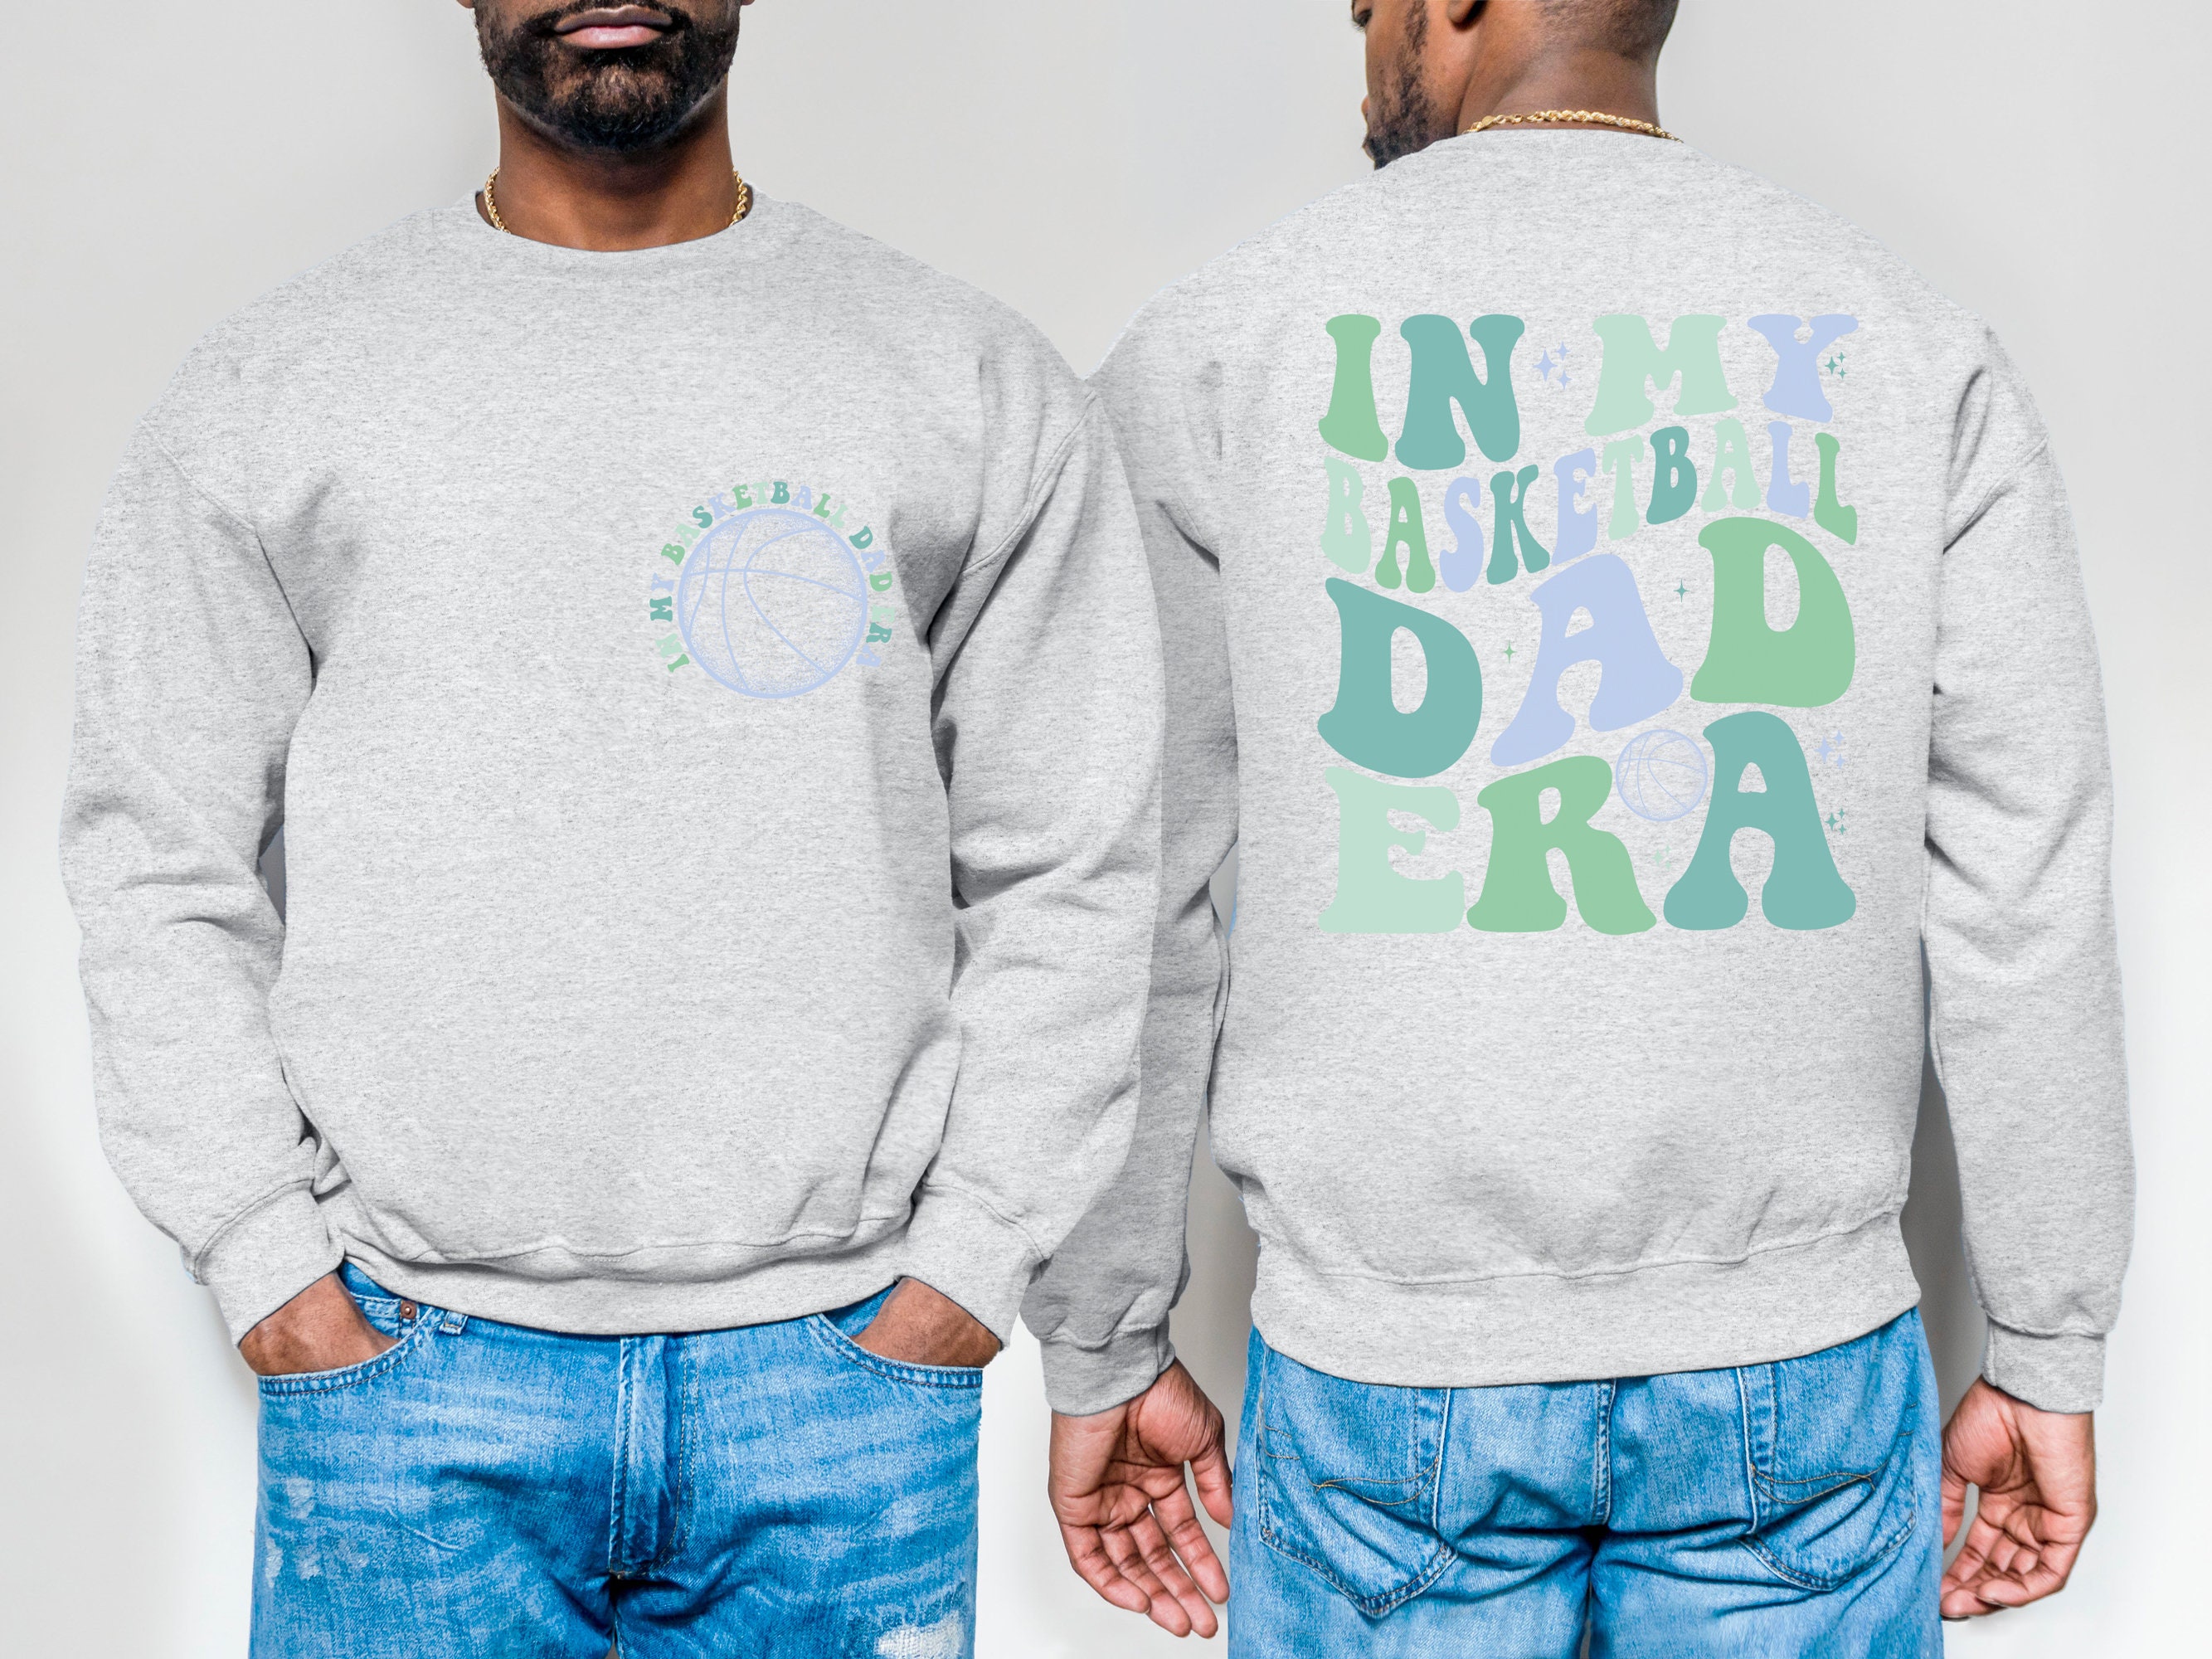 Discover In My Basketball Dad Era Double Sided Sweatshirts, Basketball Dad Double Sided Sweatshirts